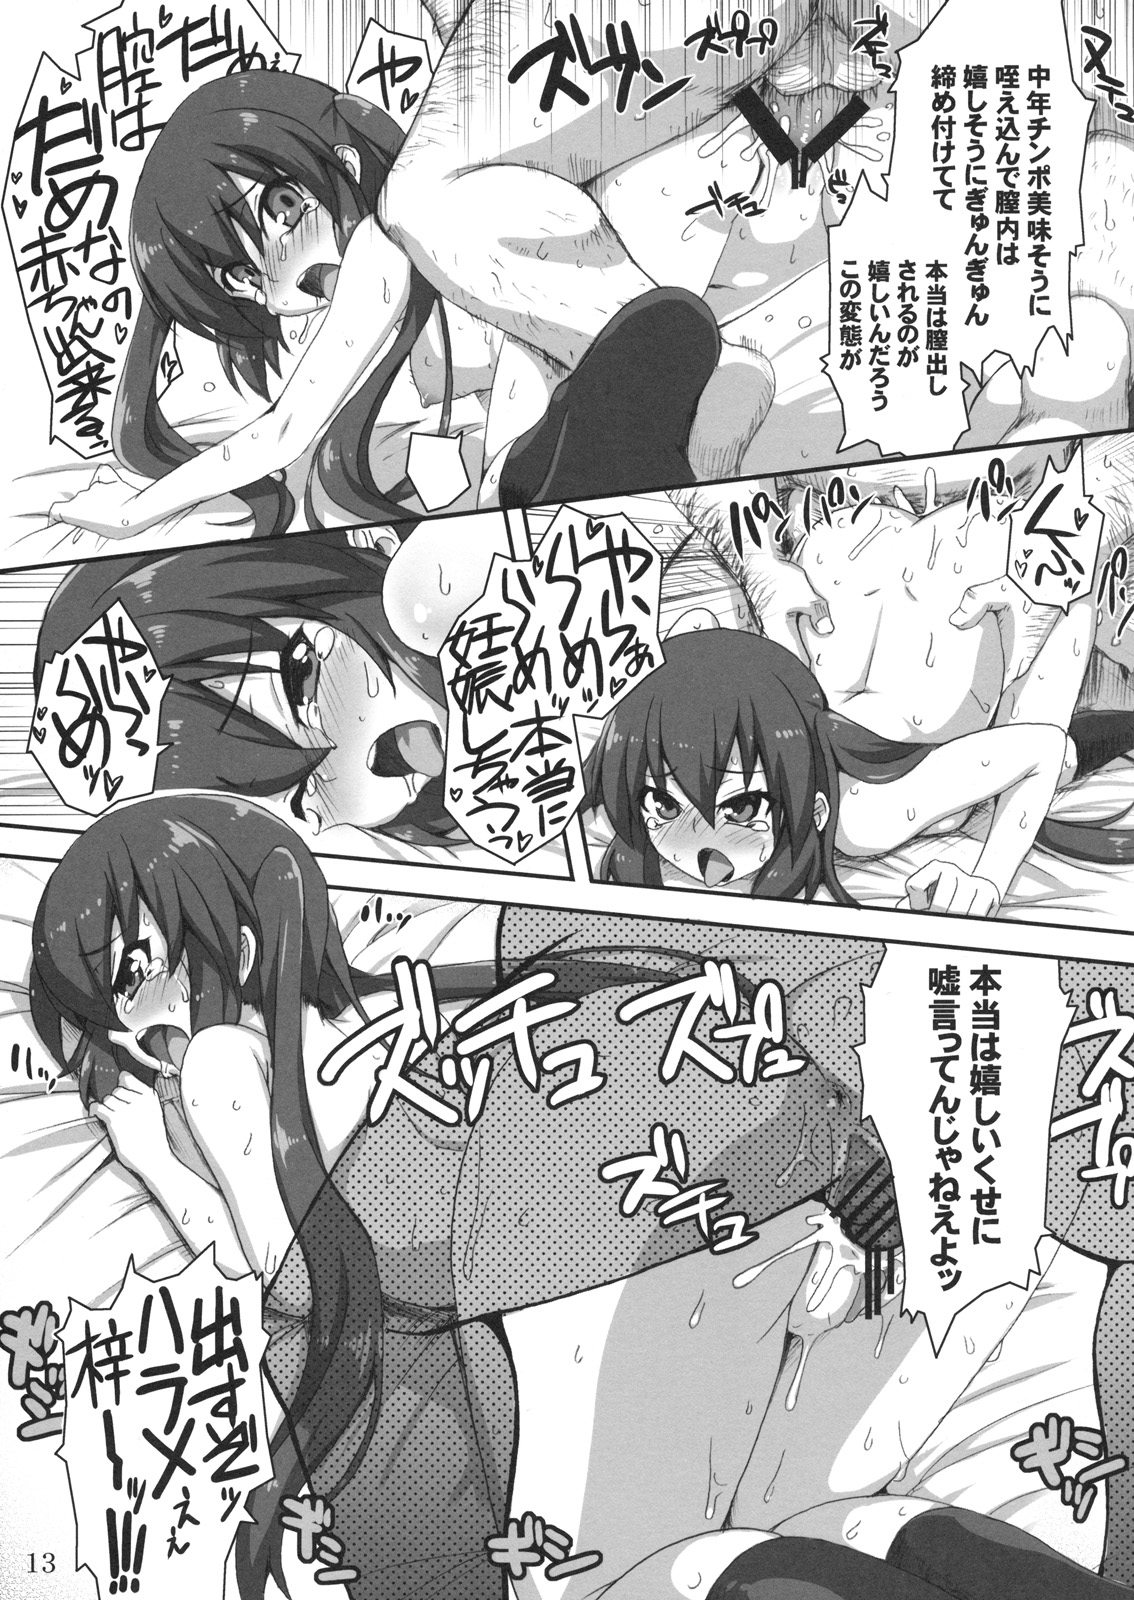 [SION (Hotori)] GirlsTuner (K-On!) page 13 full